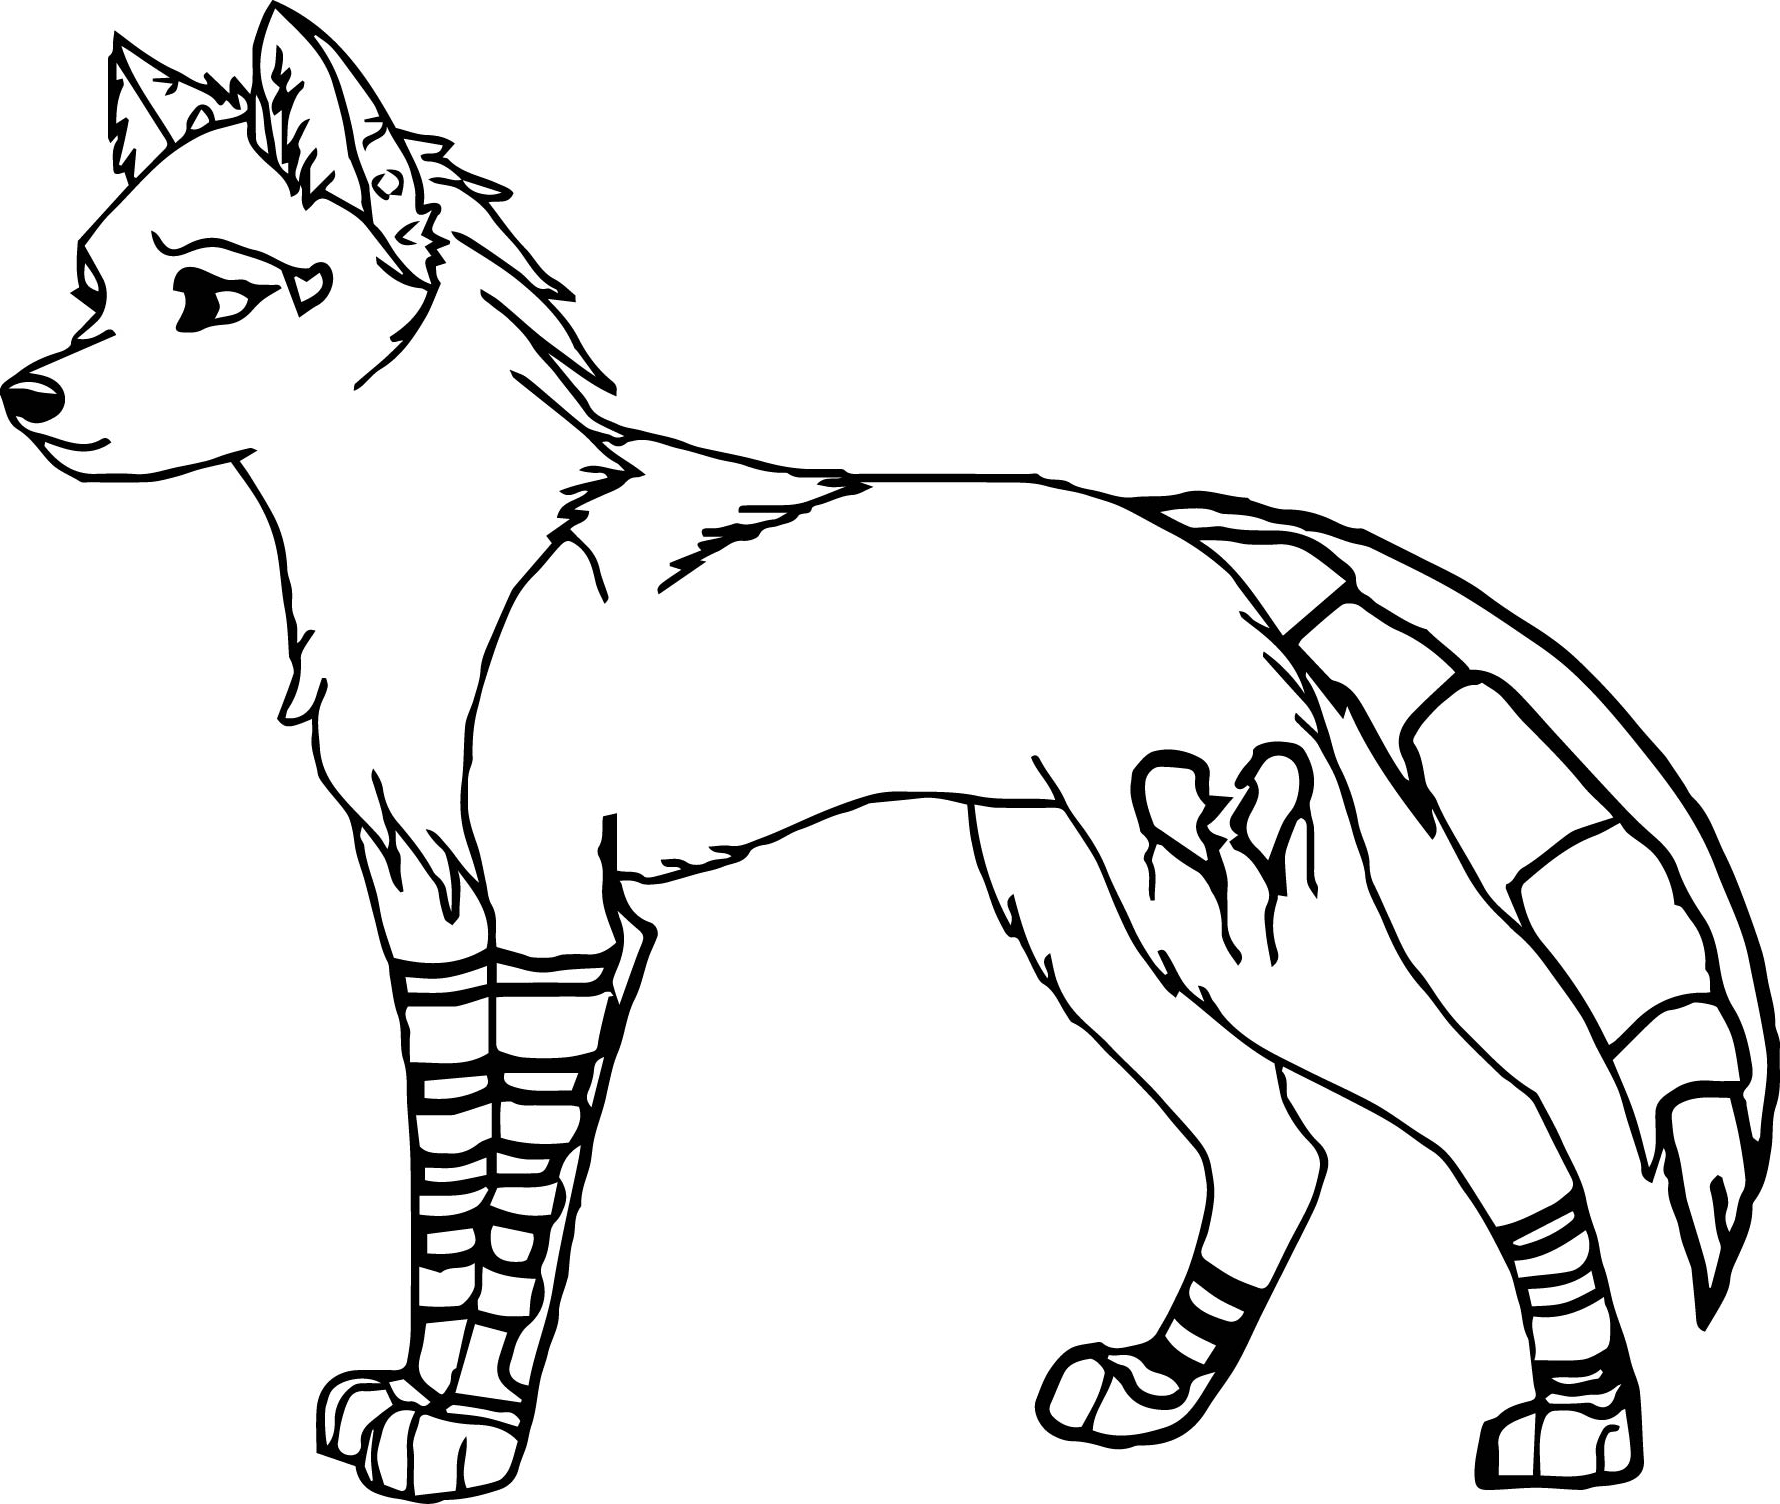 Wolf Anime Coloring Pages at GetColorings.com | Free printable